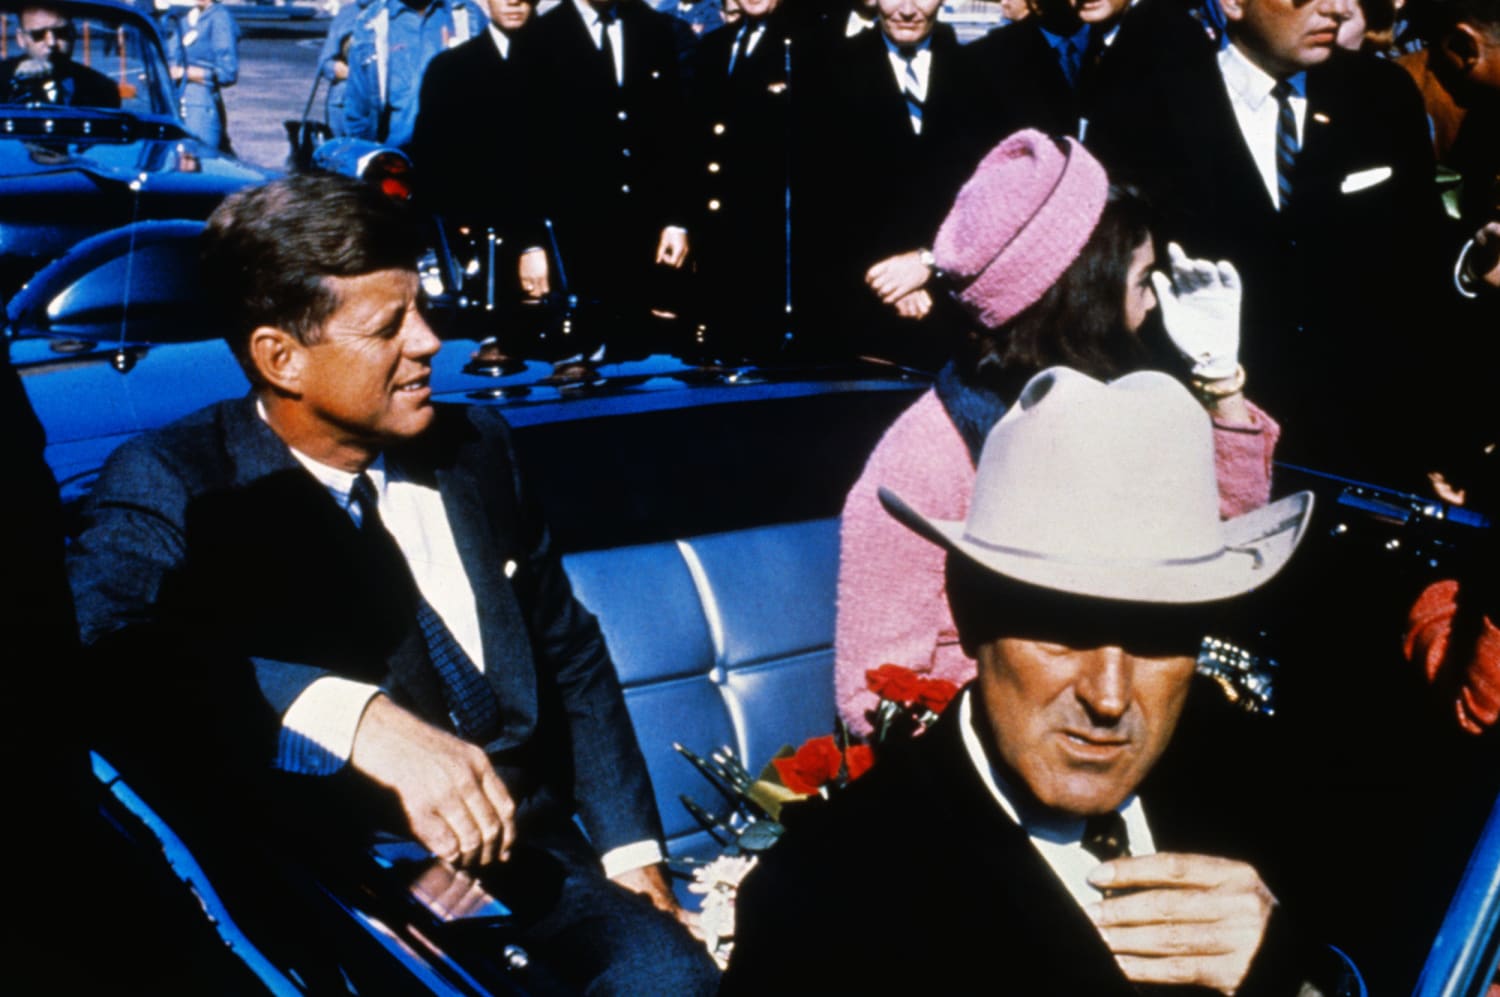 Biden releases most JFK assassination records — but withholds thousands